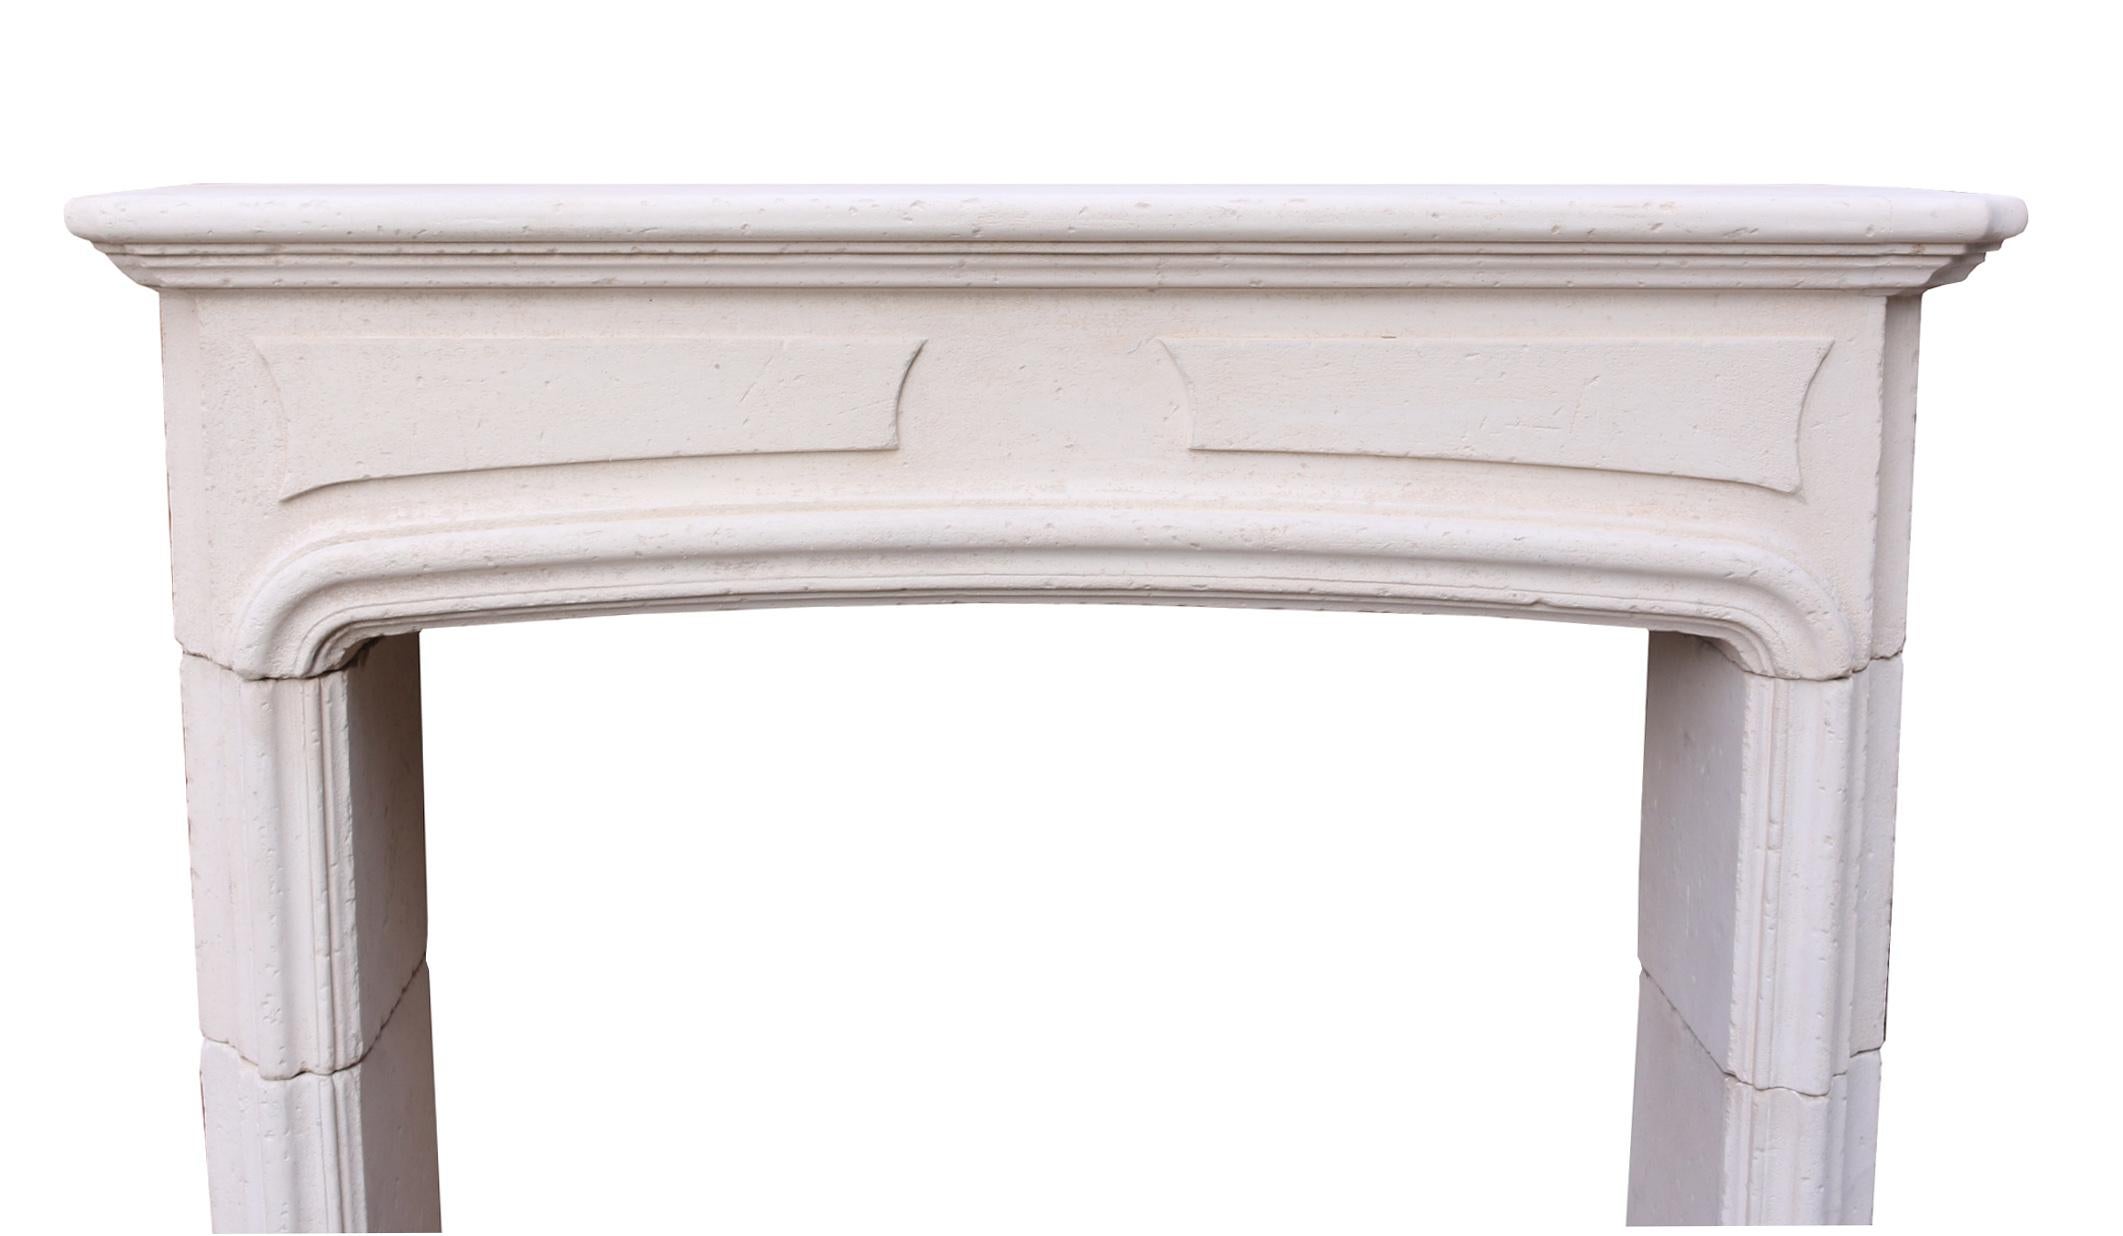 18th Century French Limestone Fire Mantel In Good Condition For Sale In Wormelow, Herefordshire